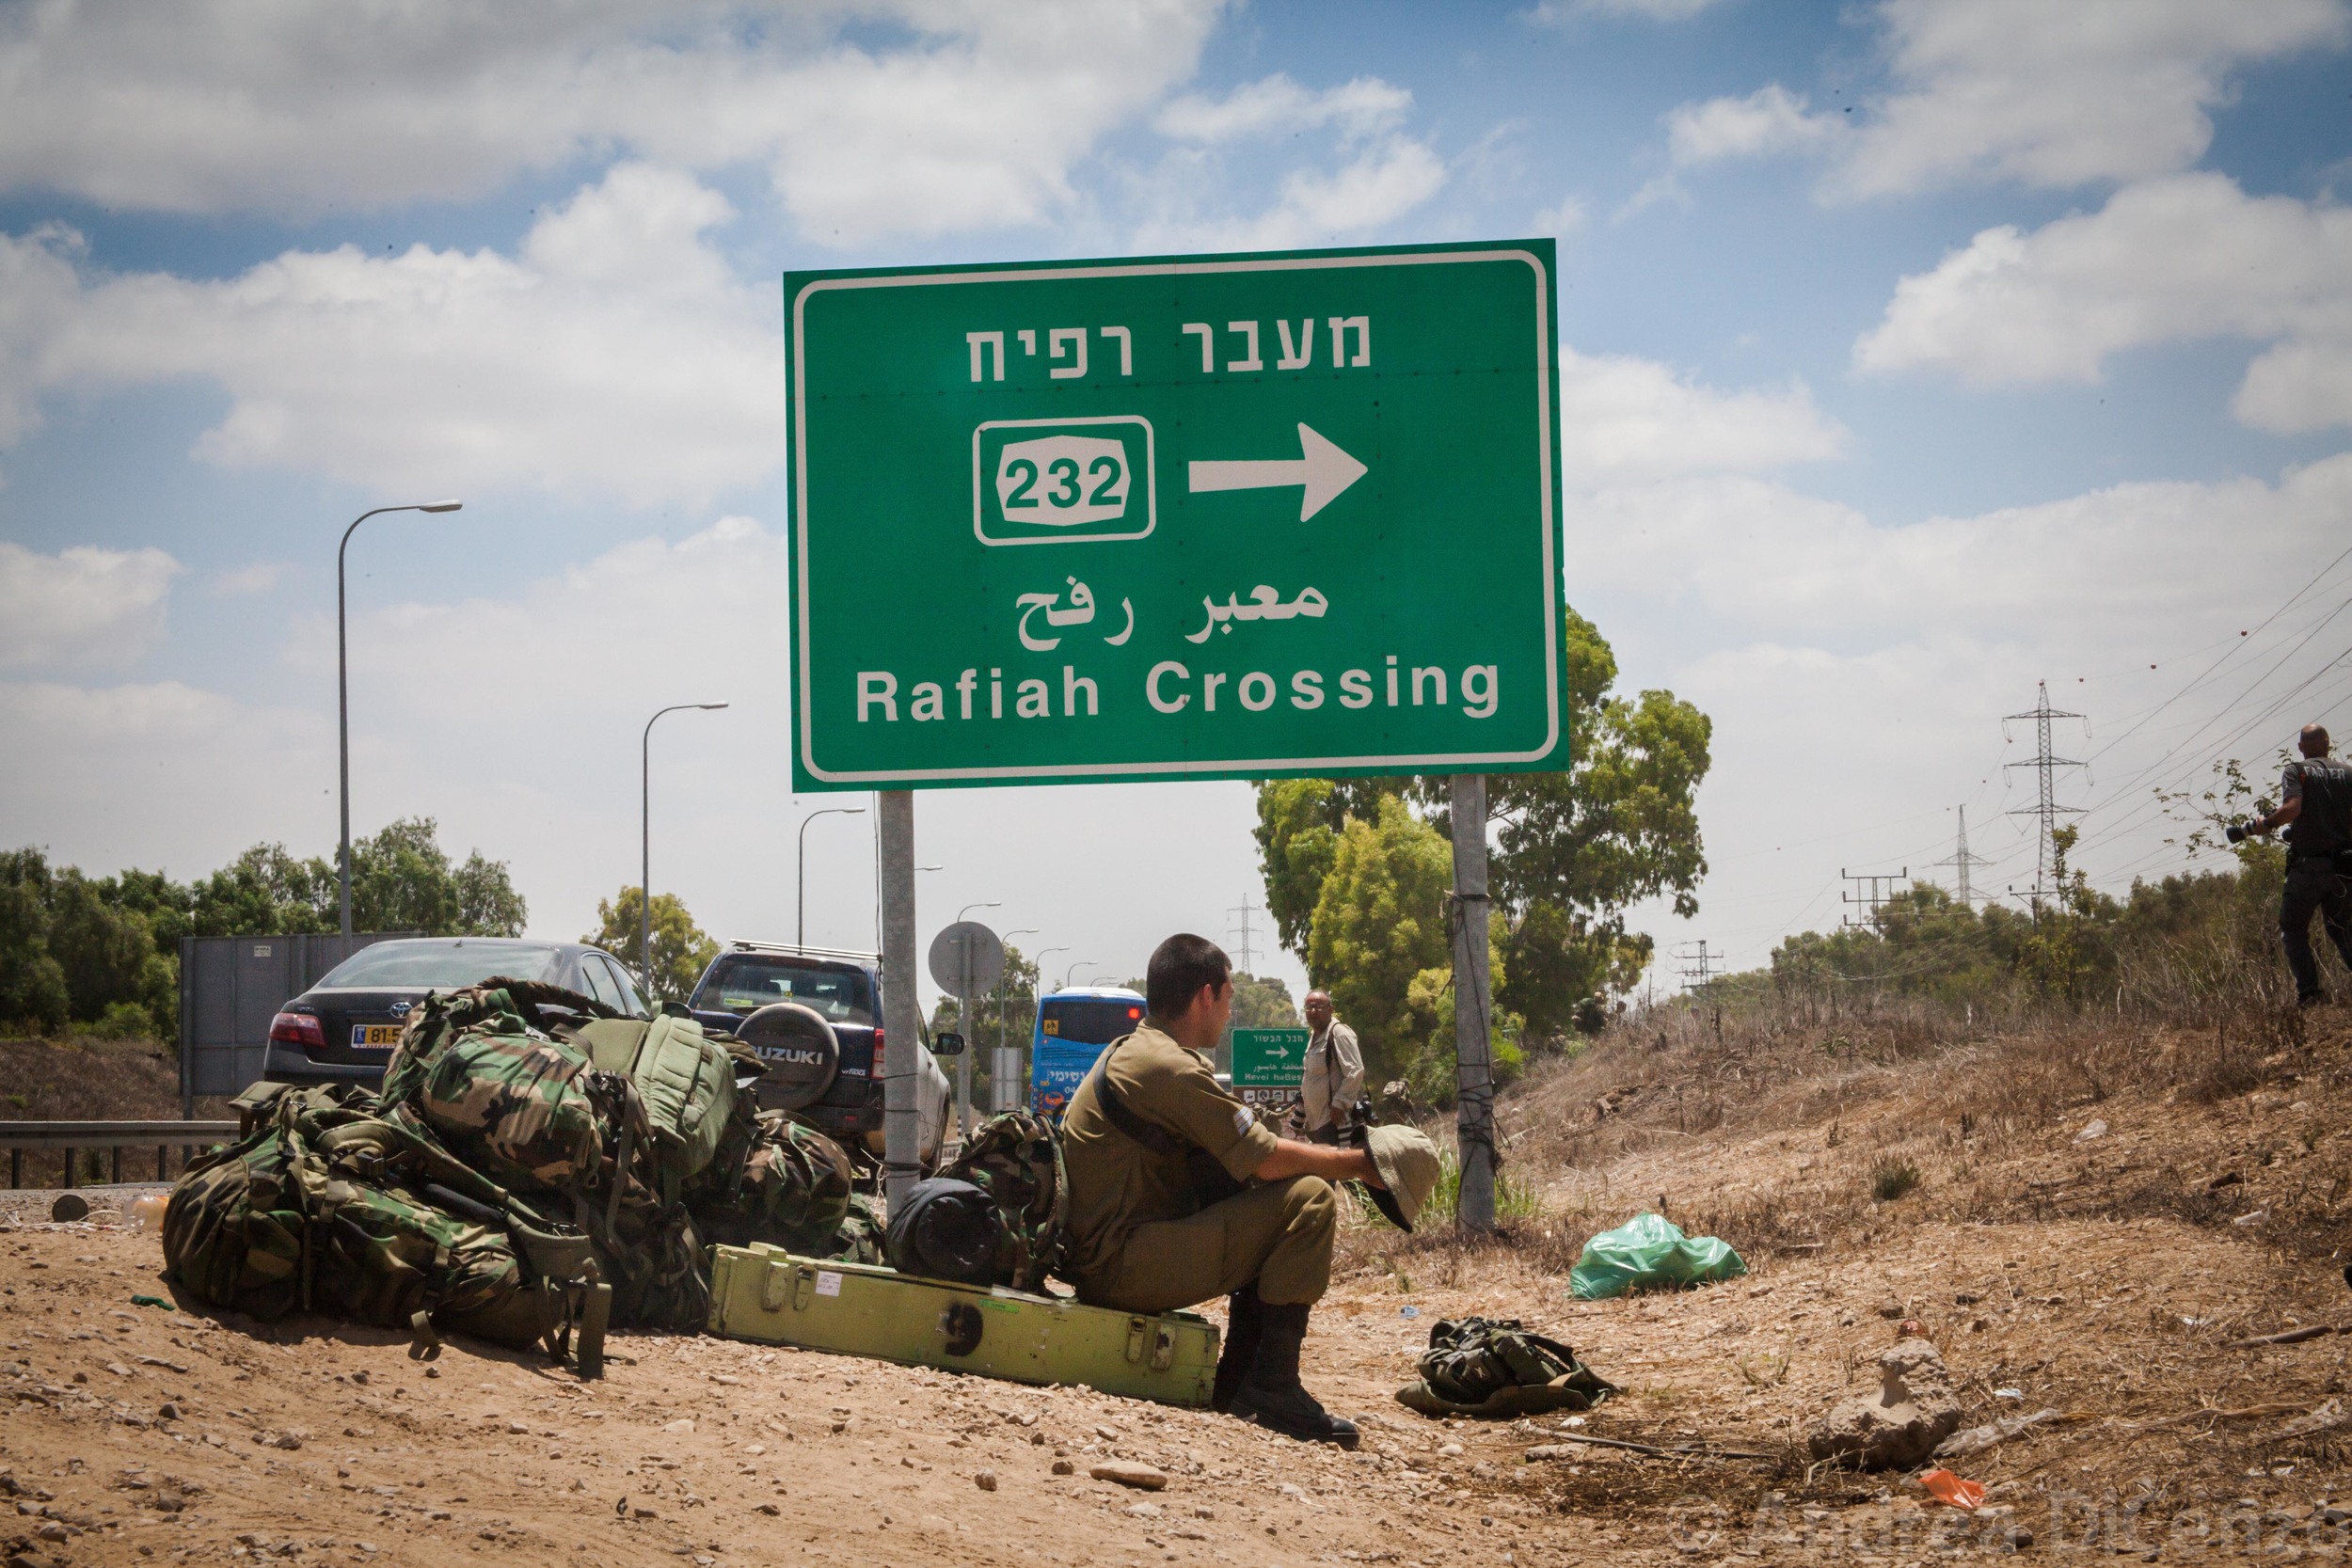  A soldier waits with equipment on the Israel/Gaza border as the ground incursion begins for Operation Protective Edge. An additional 18,000 soldiers are being called up to the border of Gaza to supplement the 40,000 soldiers already in position.&nbs